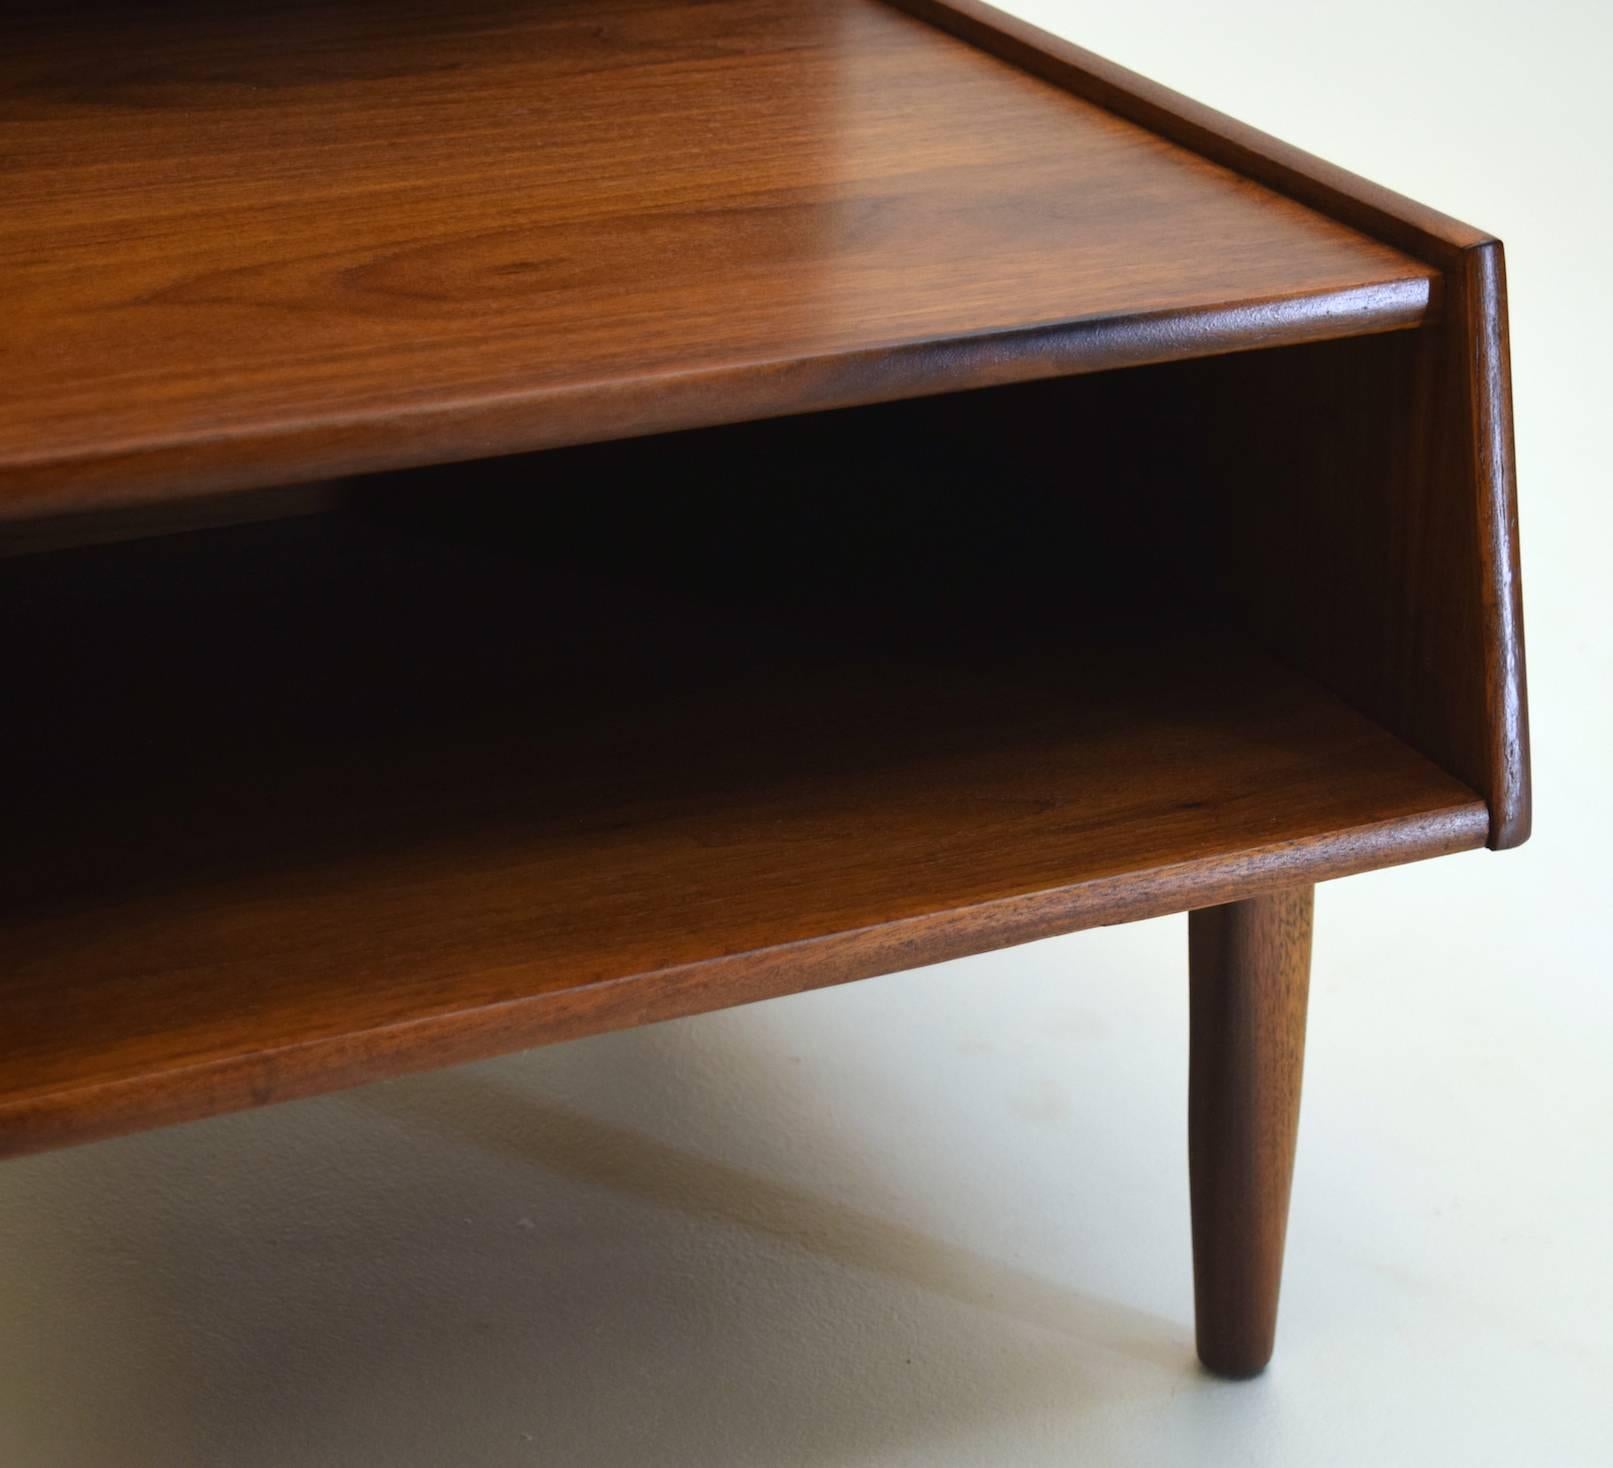 Featured is a unique vintage end table with rear, front and top levels for use as a free standing occasional, end or coffee table in a room. Ideally suited for magazine storage also.

This model was designed by Kipp Stewart and produced by Drexel.